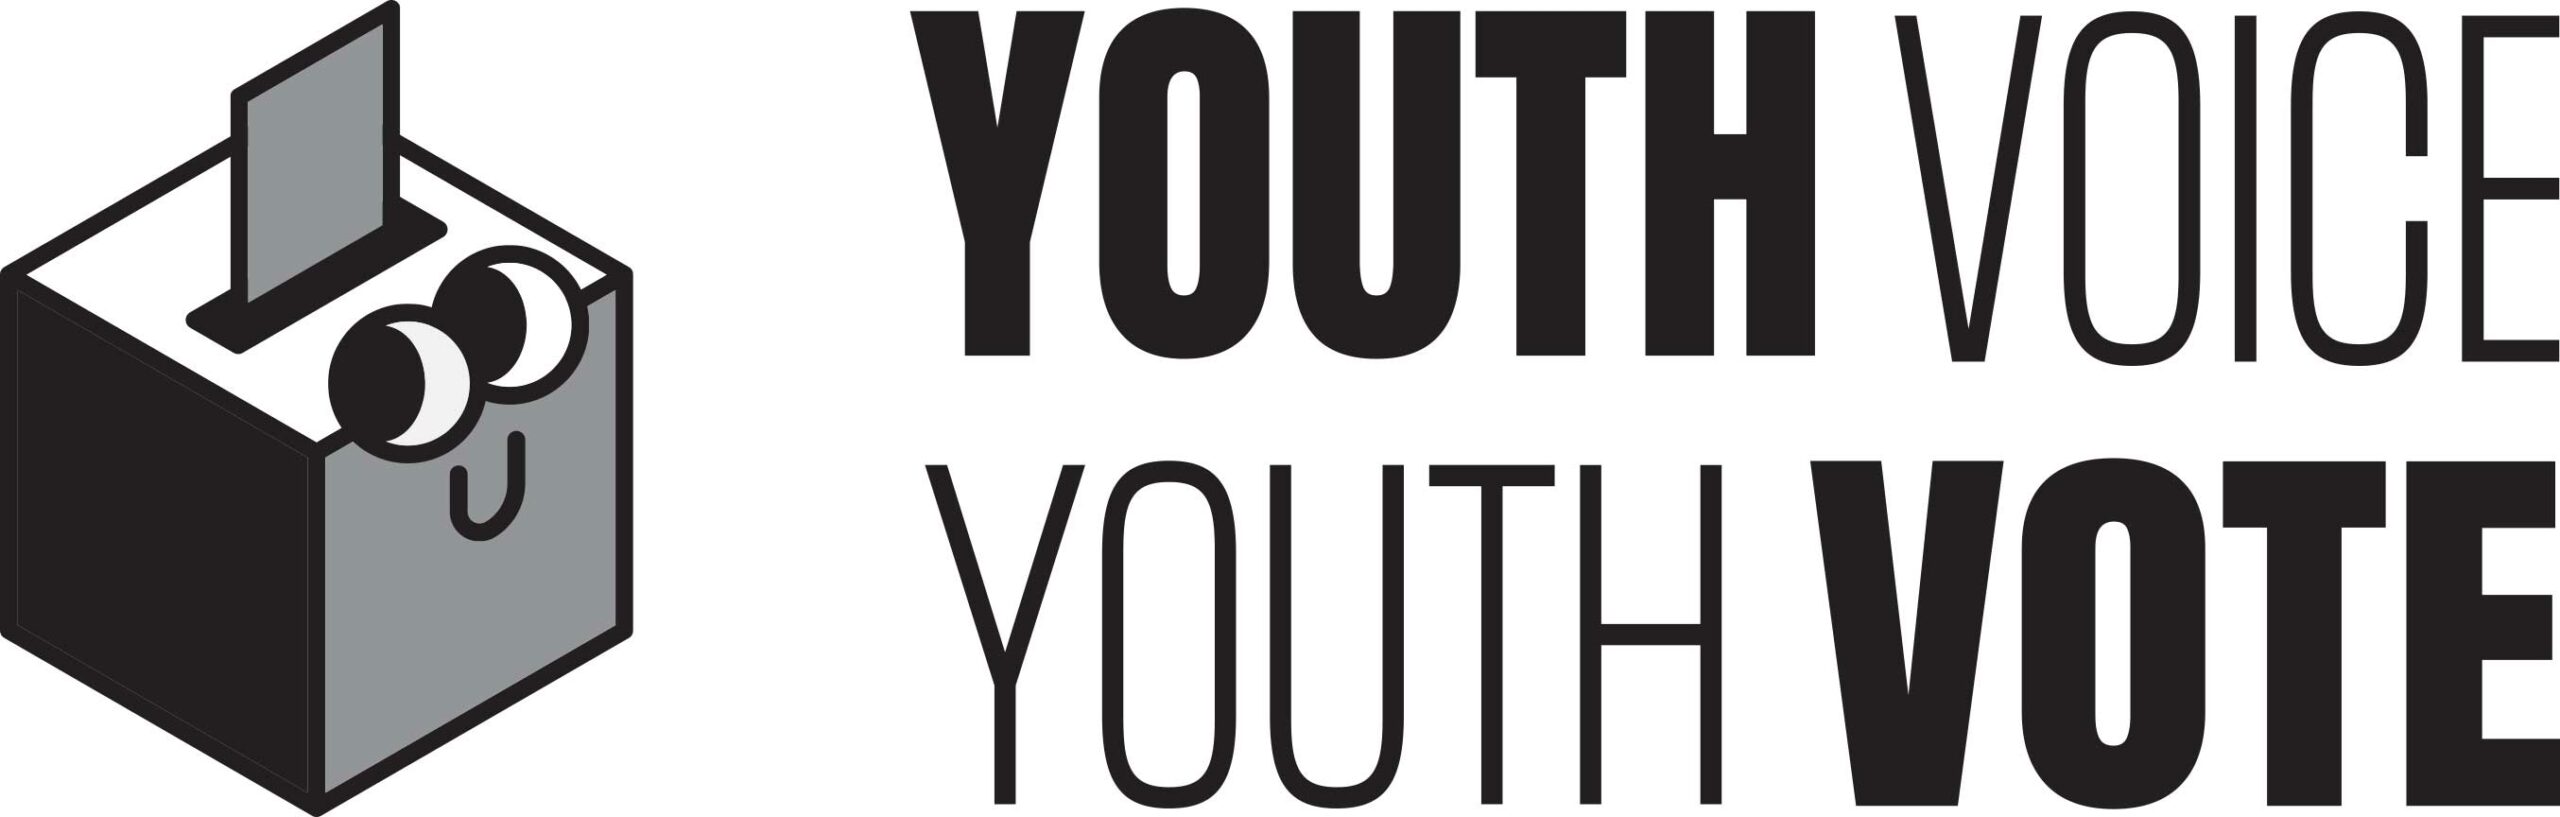 Youth Voice Youth Vote